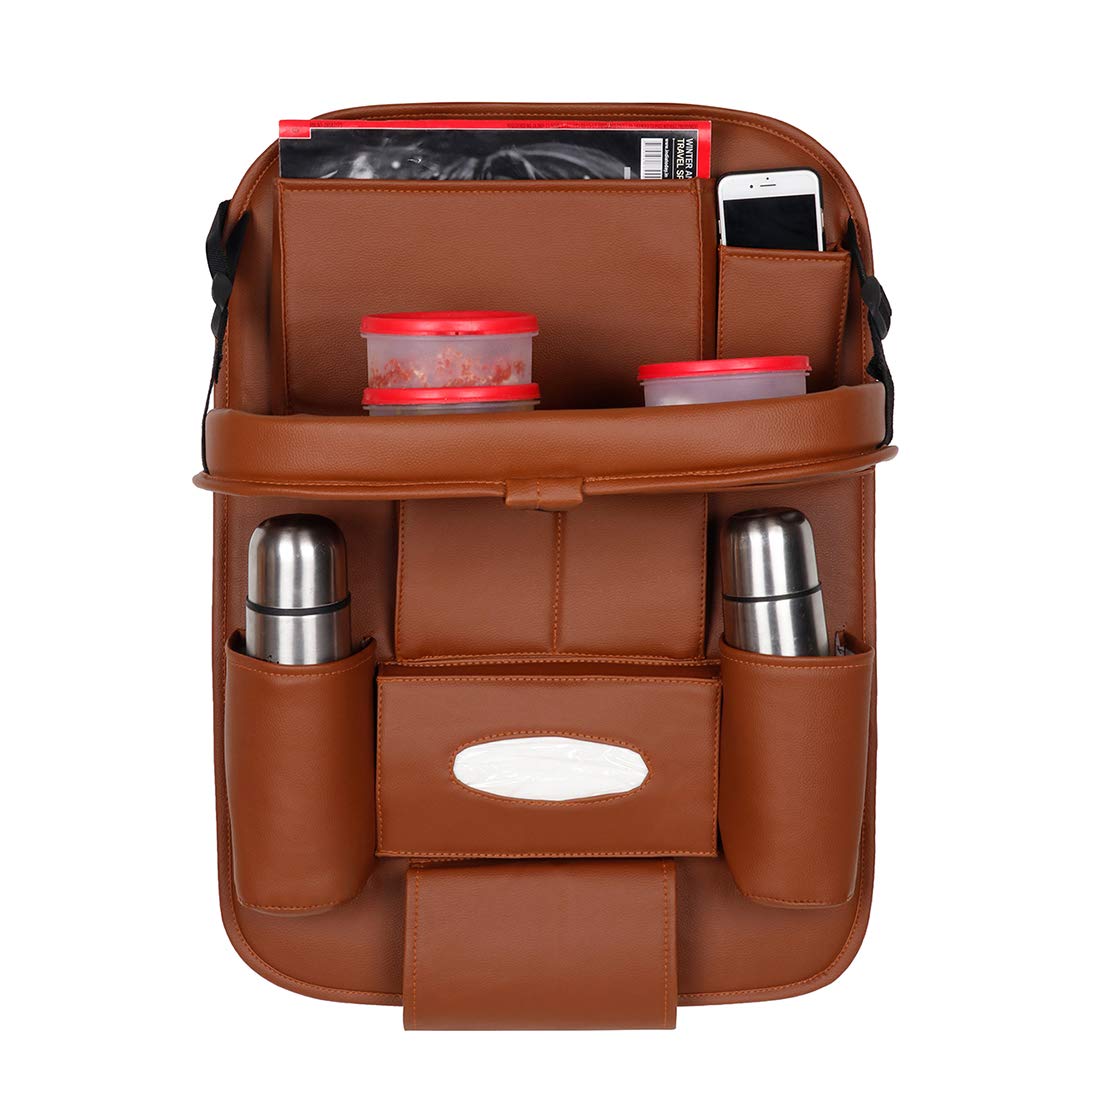 3D PREMIUM Car Seat Organizer  PU Leather with Folding Meal Tray and